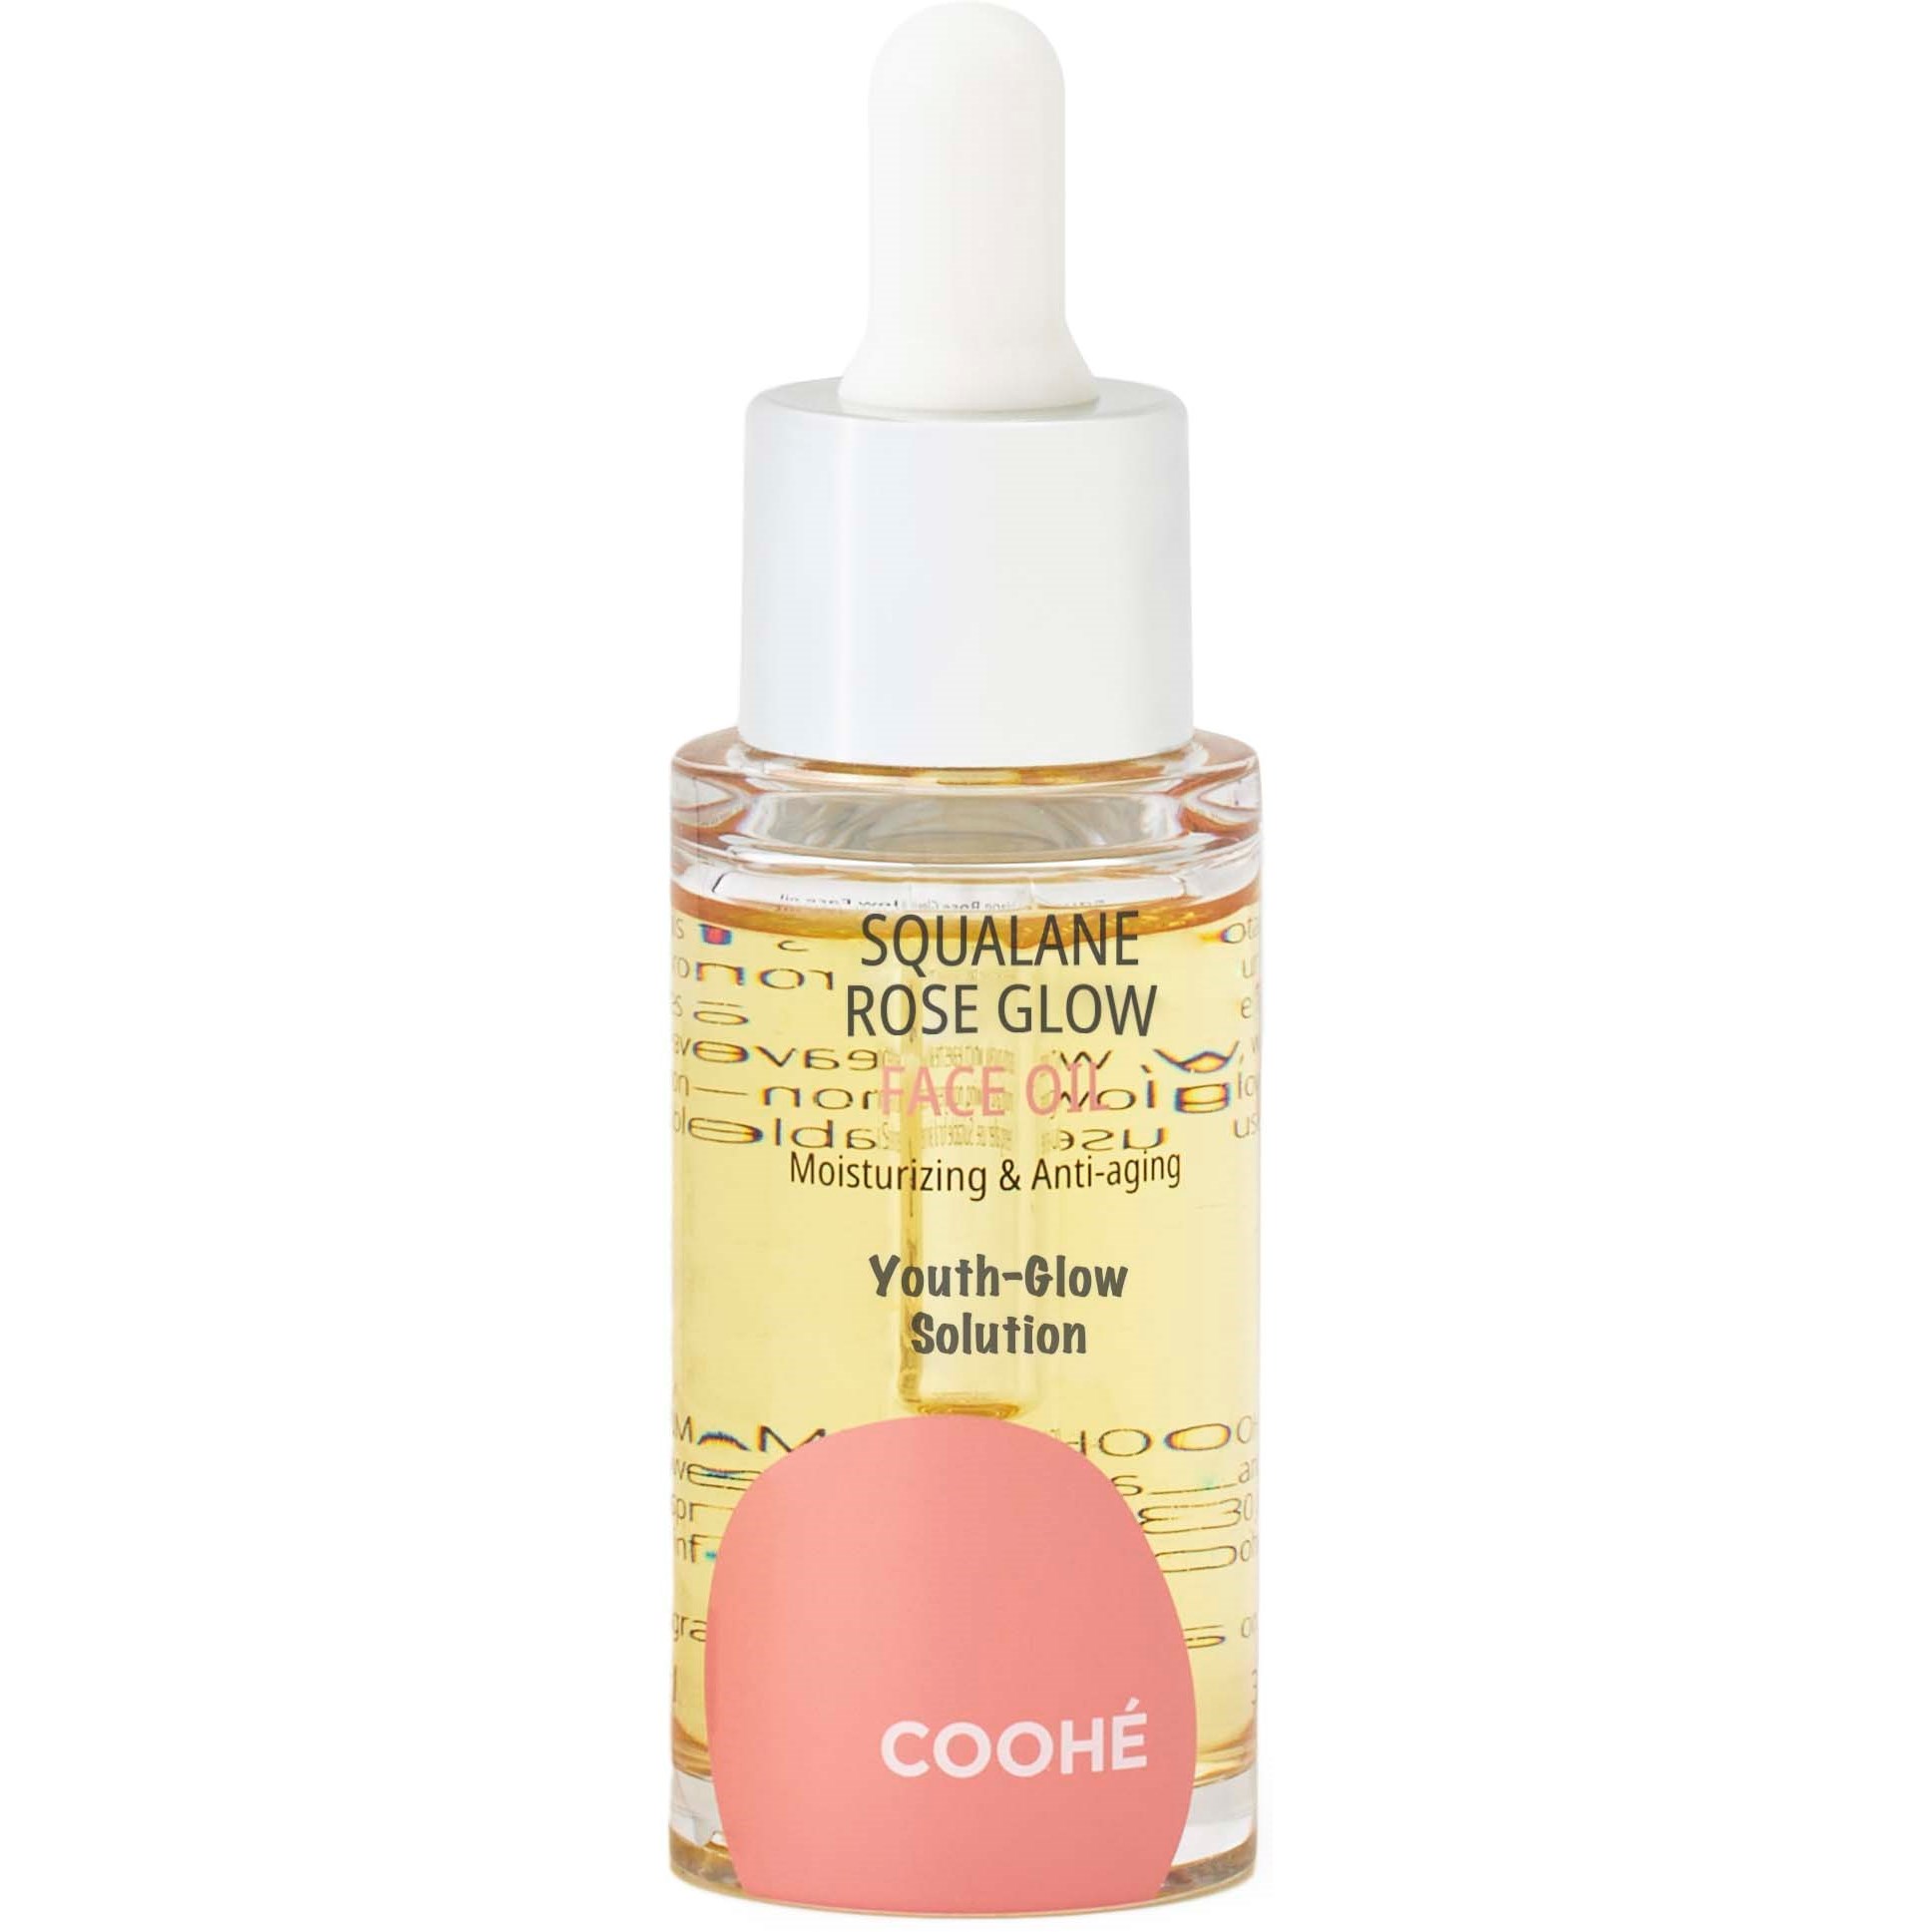 Läs mer om Coohé Youth-Glow Solution Squalane Rose Glow Face Oil 30 ml